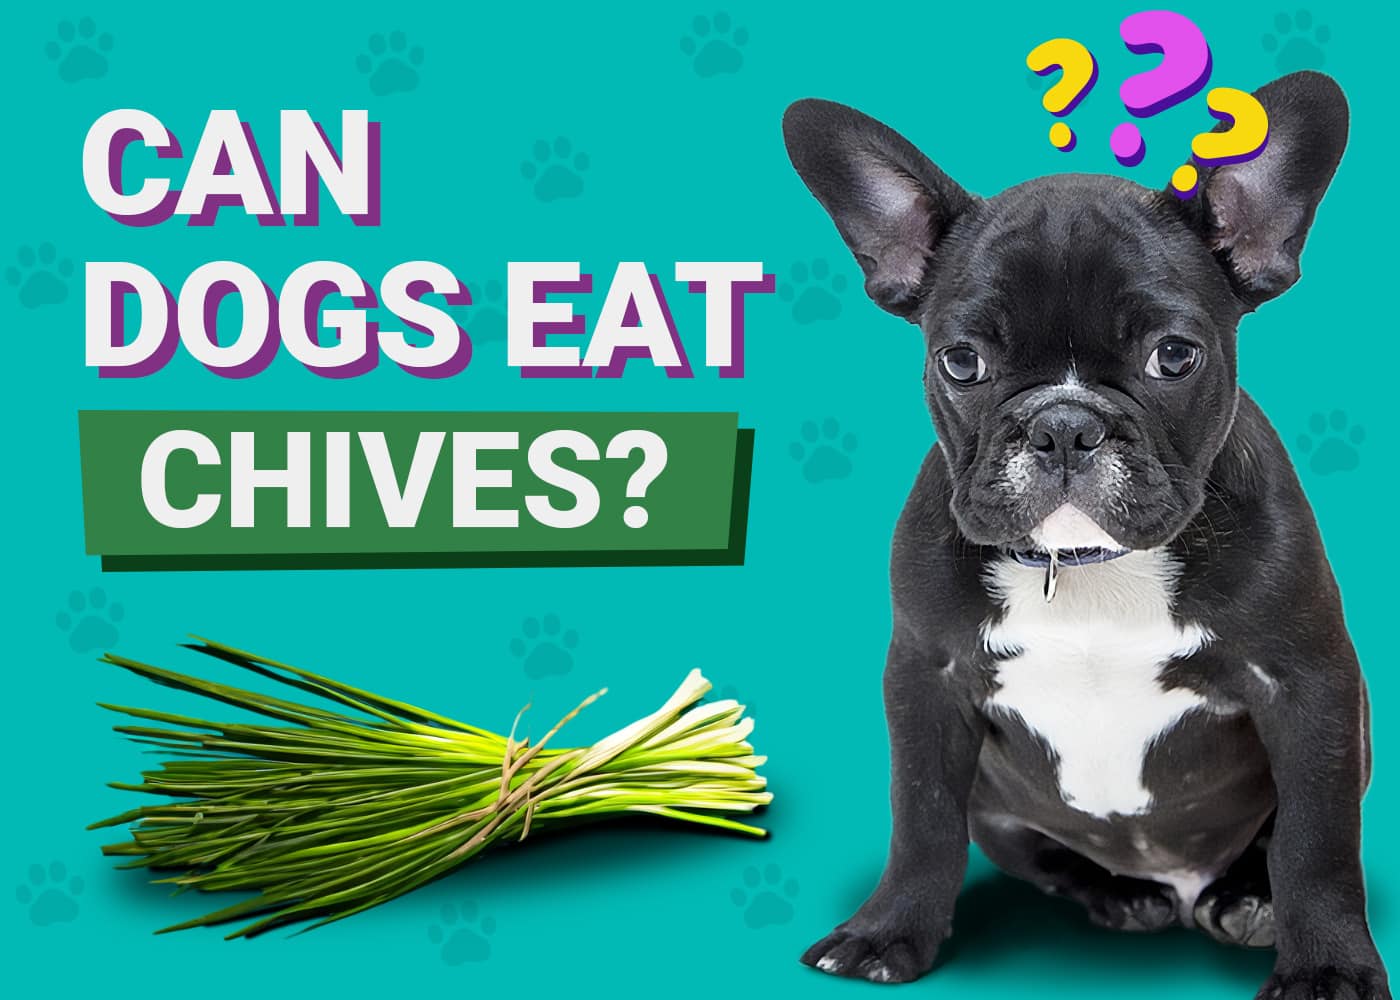 Can Dogs Eat Chives